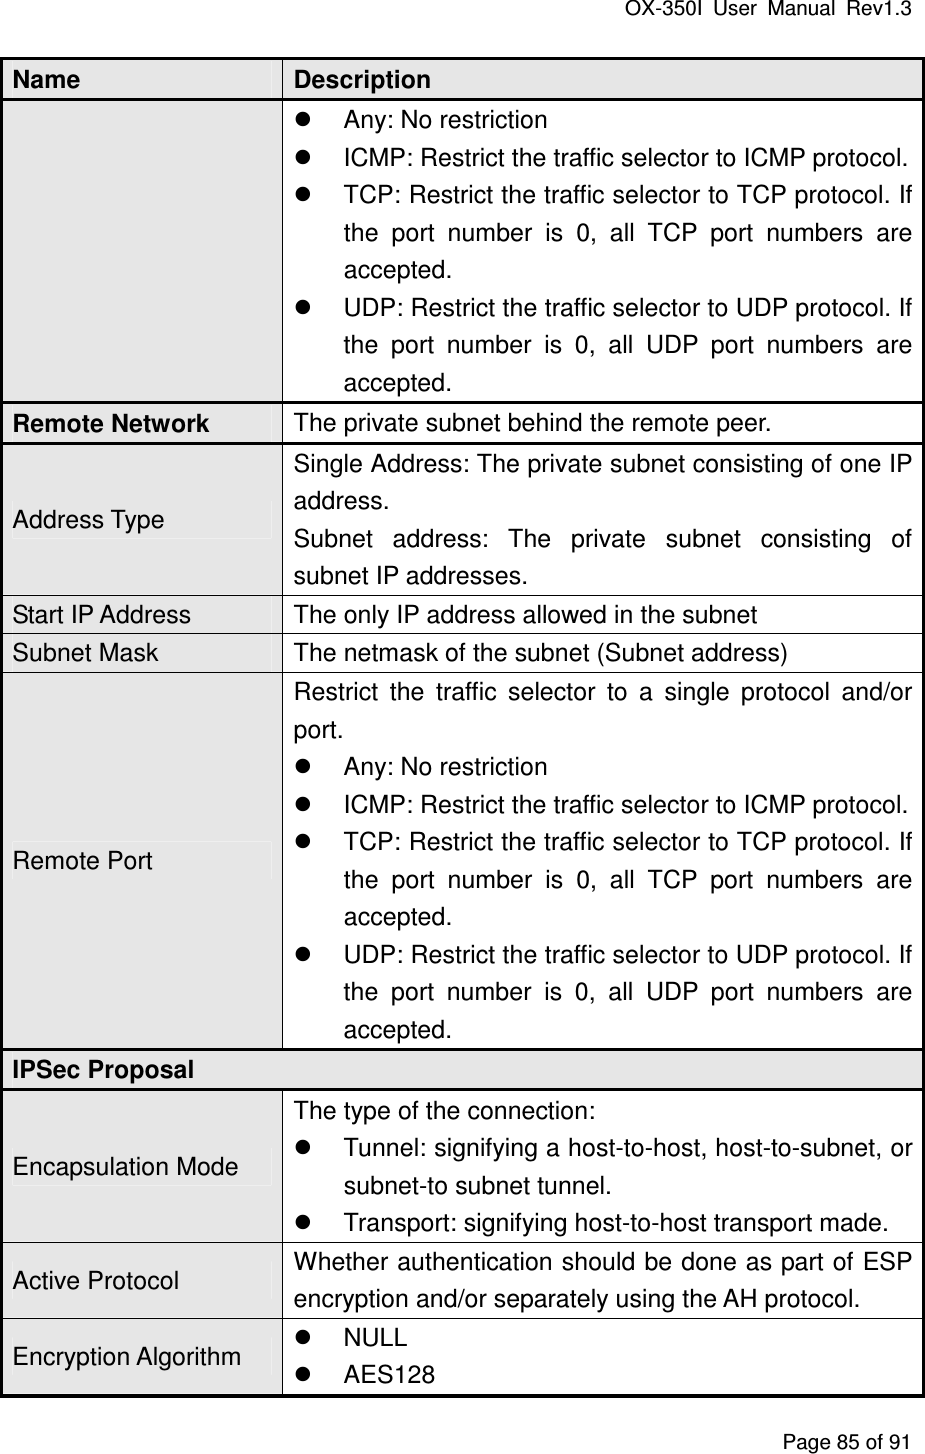 OX-350I  User  Manual  Rev1.3 Page 85 of 91 Name  Description   Any: No restriction   ICMP: Restrict the traffic selector to ICMP protocol.   TCP: Restrict the traffic selector to TCP protocol. If the  port  number  is  0,  all  TCP  port  numbers  are accepted.   UDP: Restrict the traffic selector to UDP protocol. If the  port  number  is  0,  all  UDP  port  numbers  are accepted. Remote Network  The private subnet behind the remote peer. Address Type Single Address: The private subnet consisting of one IP address. Subnet  address:  The  private  subnet  consisting  of subnet IP addresses. Start IP Address  The only IP address allowed in the subnet Subnet Mask  The netmask of the subnet (Subnet address) Remote Port Restrict  the  traffic  selector  to  a  single  protocol  and/or port.   Any: No restriction   ICMP: Restrict the traffic selector to ICMP protocol.   TCP: Restrict the traffic selector to TCP protocol. If the  port  number  is  0,  all  TCP  port  numbers  are accepted.   UDP: Restrict the traffic selector to UDP protocol. If the  port  number  is  0,  all  UDP  port  numbers  are accepted. IPSec Proposal Encapsulation Mode The type of the connection:   Tunnel: signifying a host-to-host, host-to-subnet, or subnet-to subnet tunnel.   Transport: signifying host-to-host transport made. Active Protocol  Whether authentication should be done as part of ESP encryption and/or separately using the AH protocol. Encryption Algorithm   NULL   AES128 